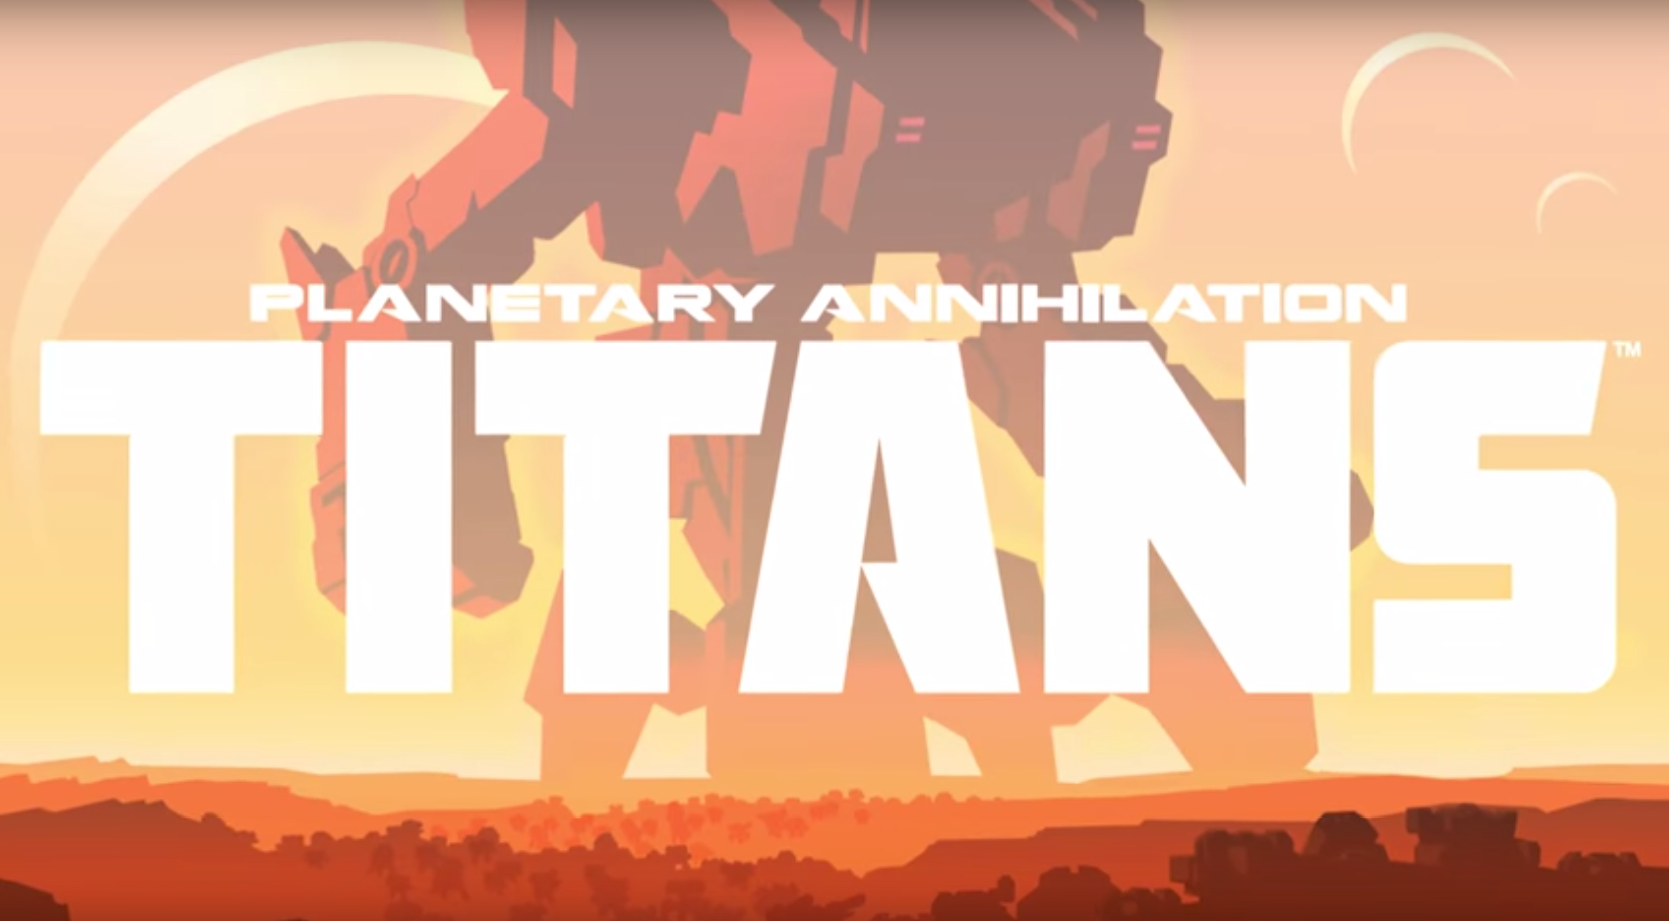 Revealed: “Planetary Annihilation: TITANS” - Because throwing planets at your enemies just wasn't enough.